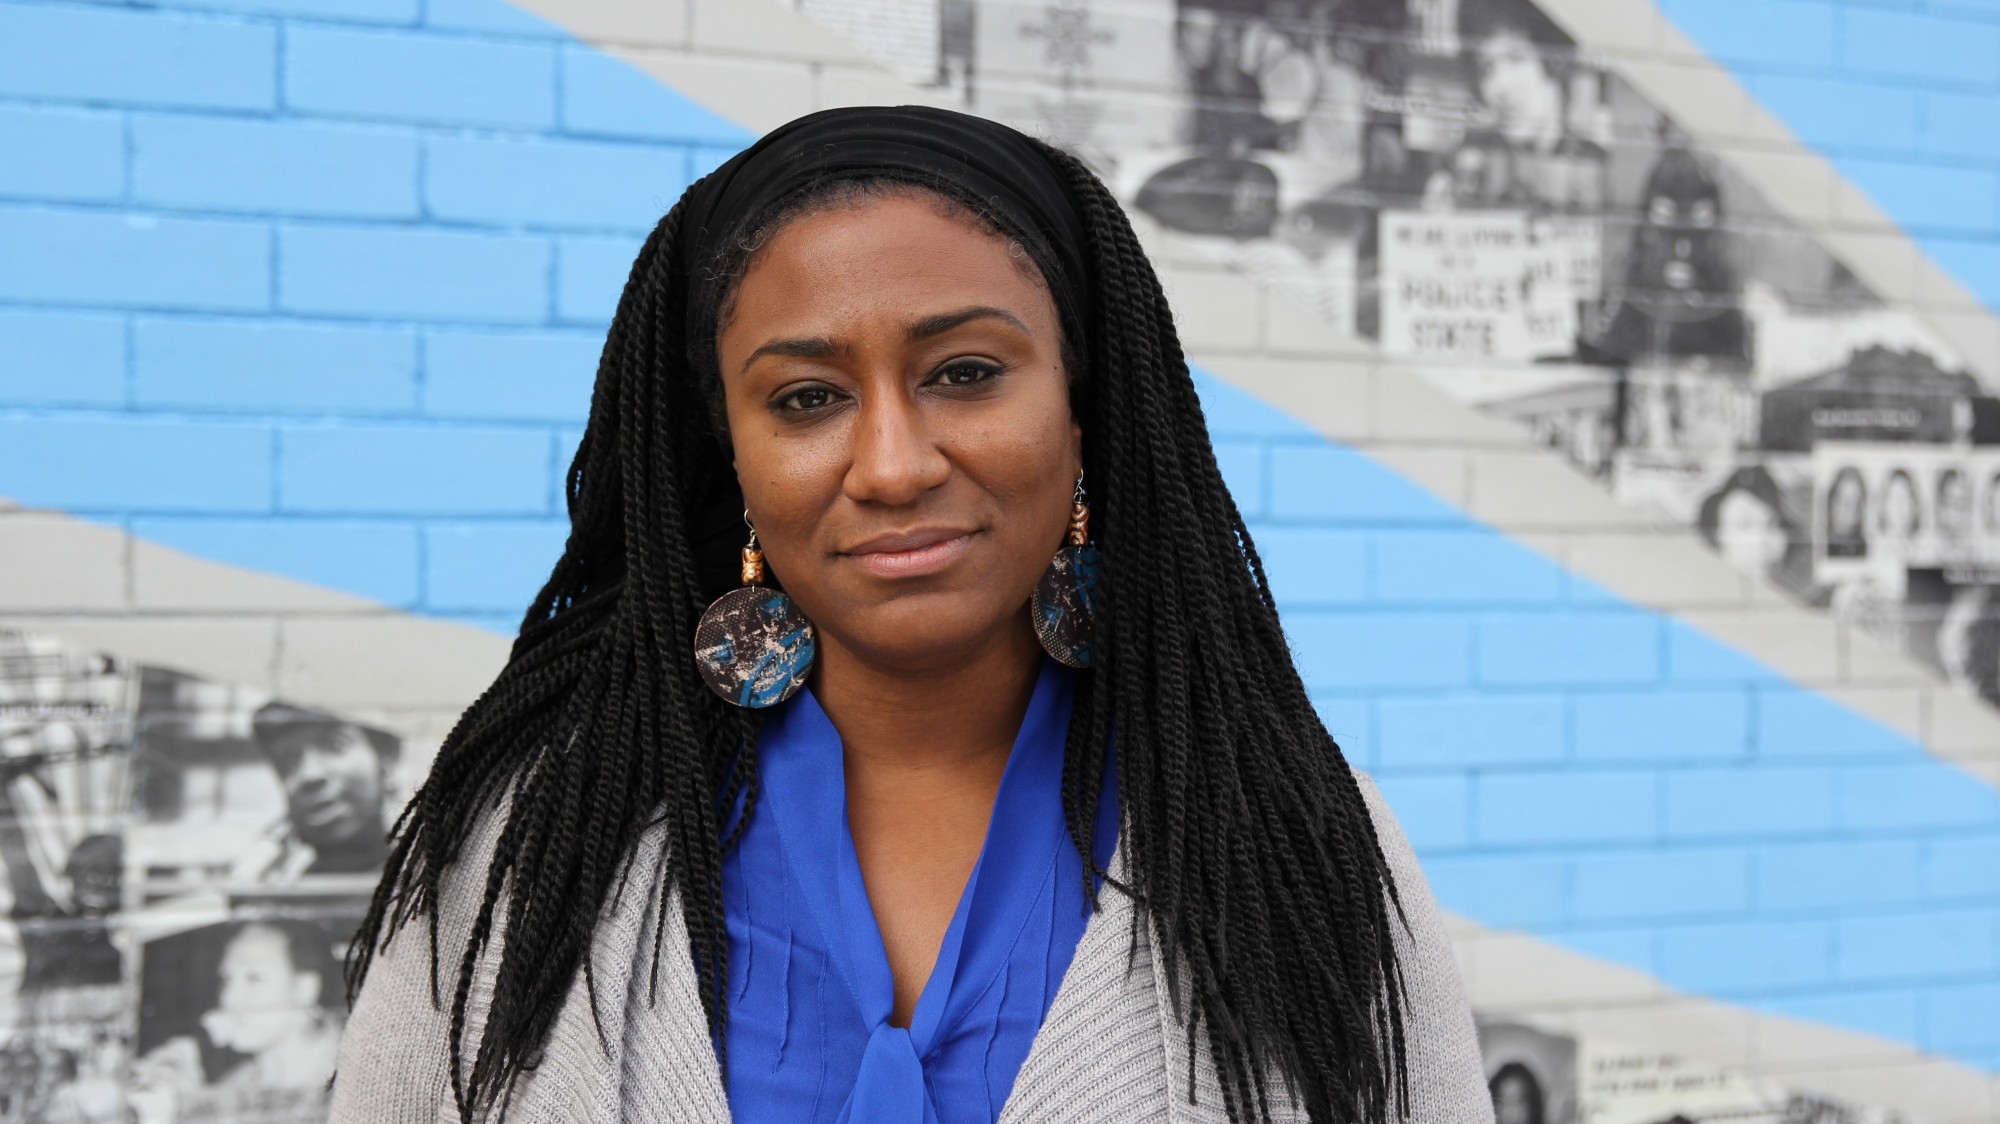 Zenzele Isoke looks directly into the camera, smiling, standing in front of a muraled wall, just out of focus.